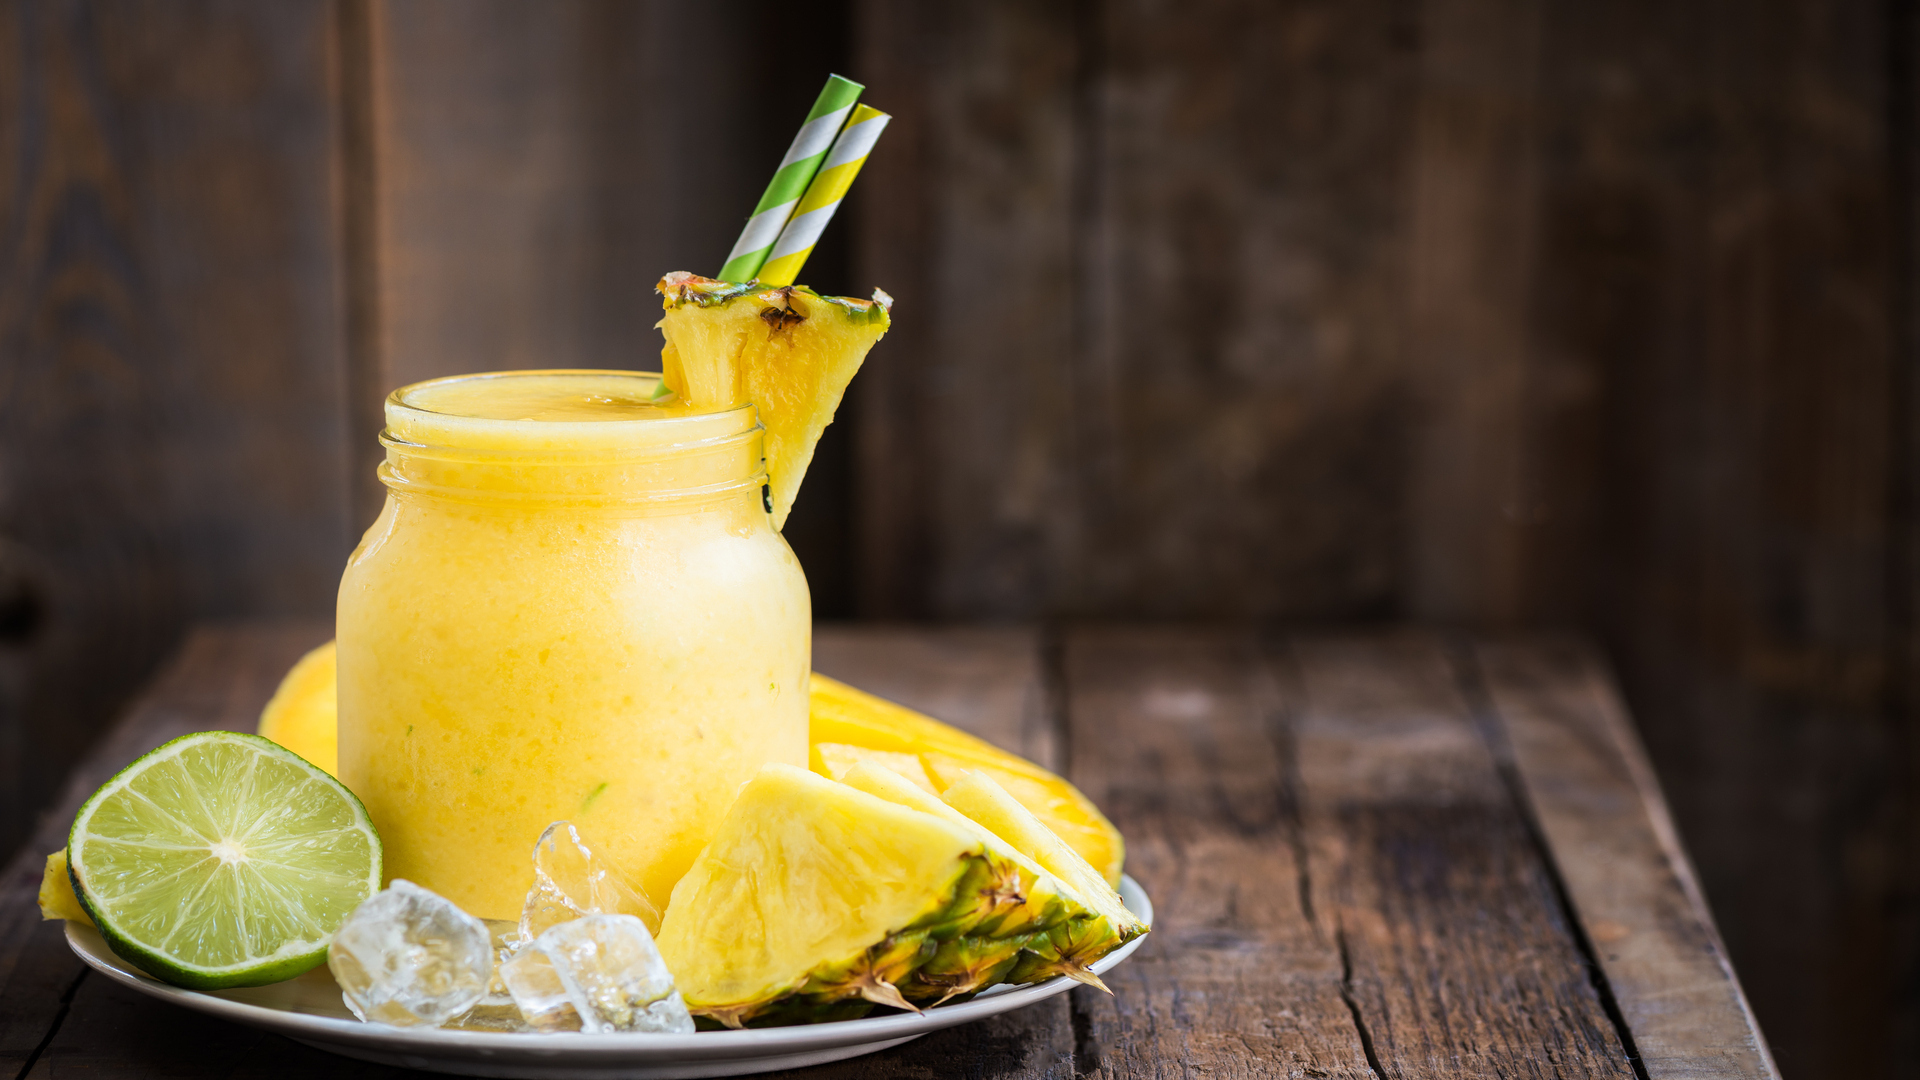 Pineapple Ginger Spice Smoothie